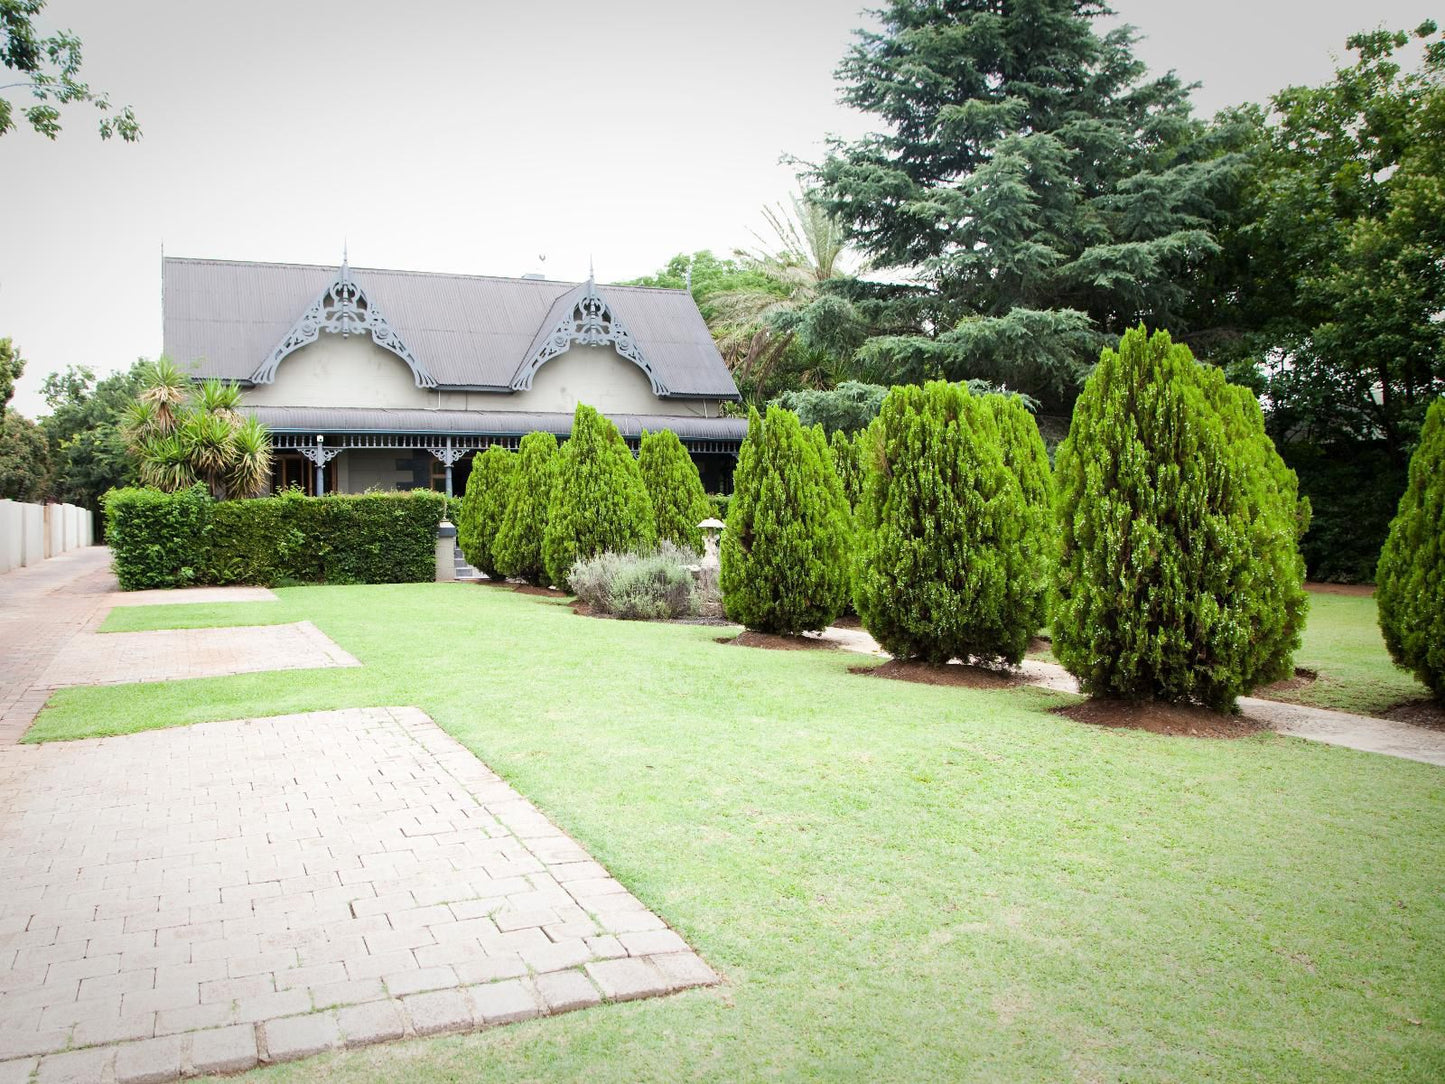 The Gables Guest House Middelburg Mpumalanga Mpumalanga South Africa House, Building, Architecture, Garden, Nature, Plant